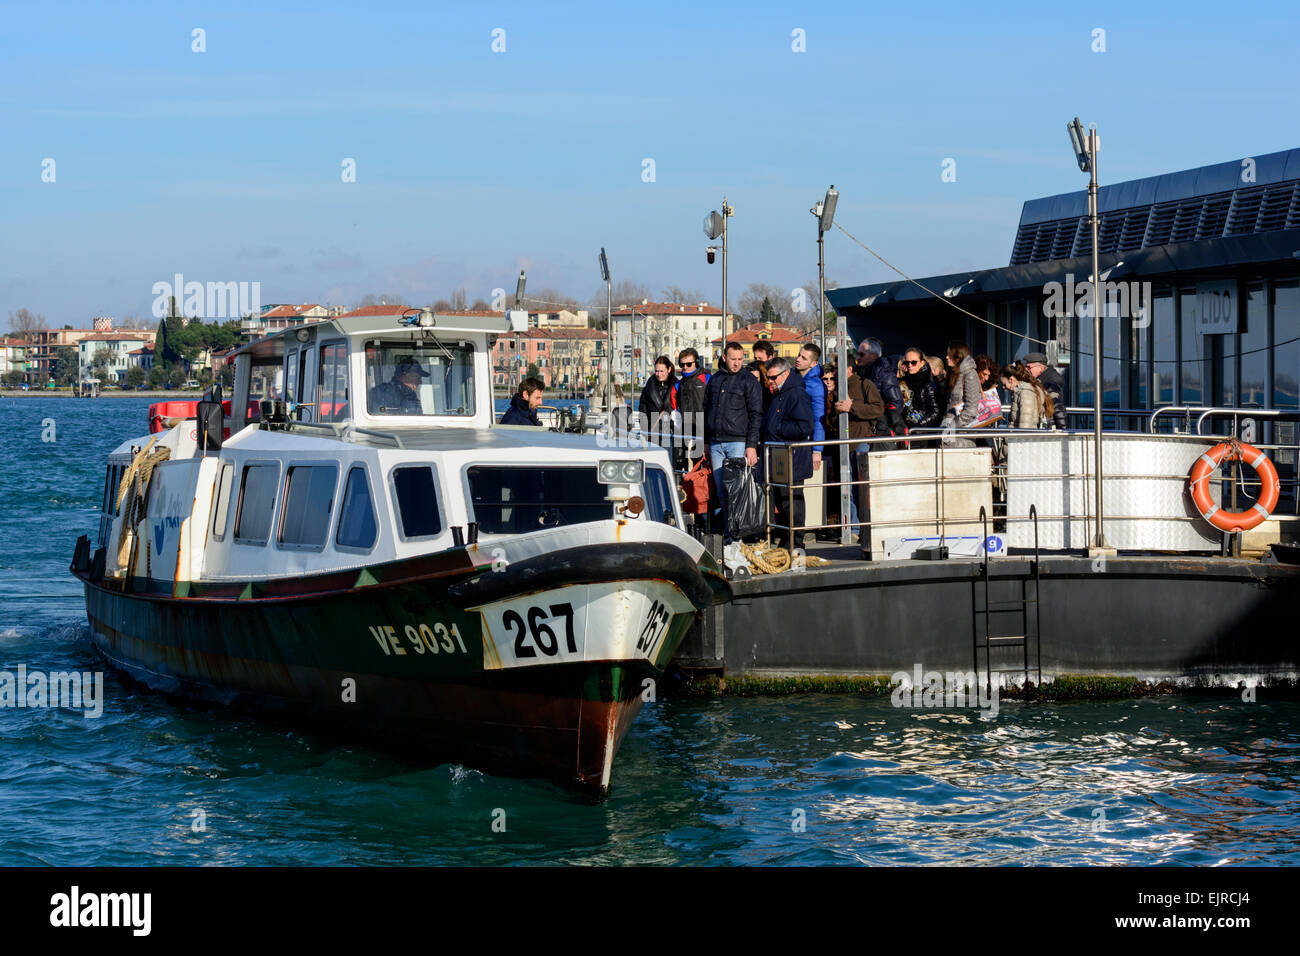 Public ferries and water taxis on the Grand Canal, Venice, Italy. Stock Photo